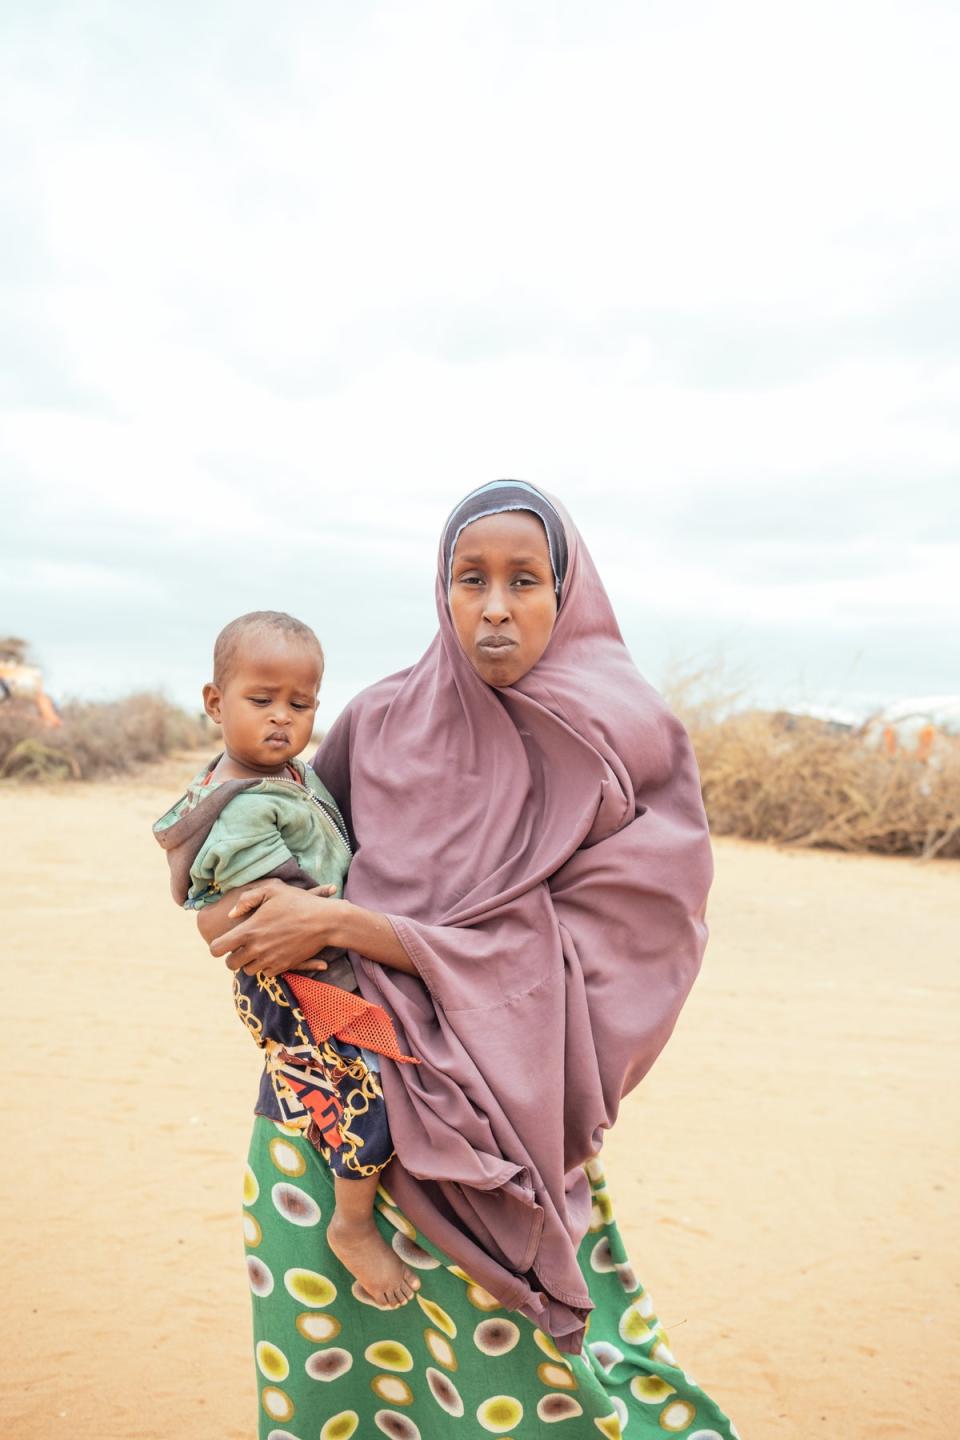 Shamsa in Togdheer Region: “The most challenging thing we are facing here is that prices are increasing, and we don’t have income.” (Khadija Farah/ActionAid UK)